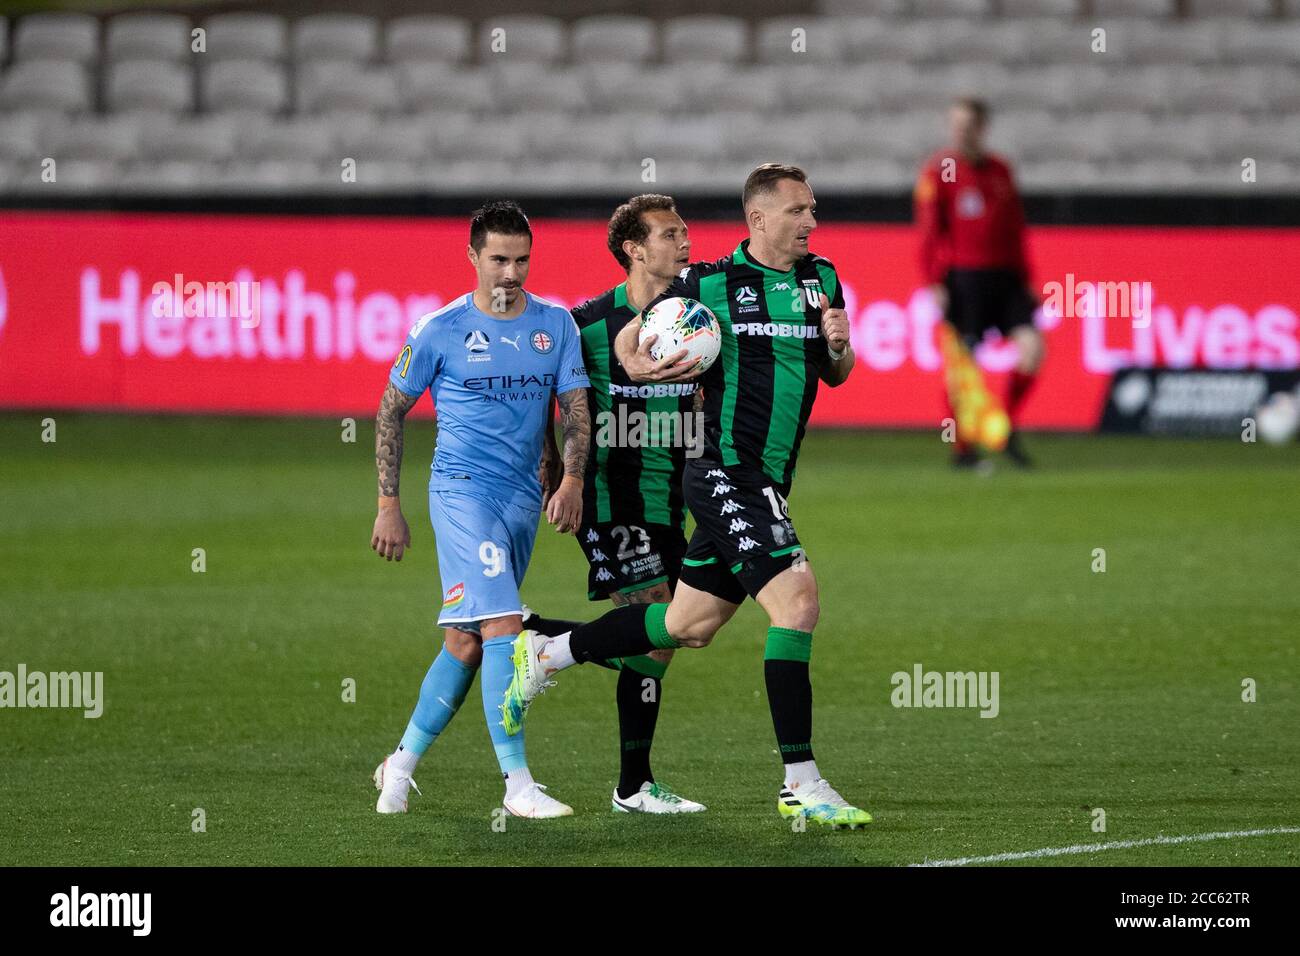 afstand sympati Natura Sidney, Australia. 19th Aug, 2020. Western United forward Besart Berisha (18)  scores a from the penalty spot during the Hyundai A League match between  Western United and Melbourne City at Netstrata Jubilee